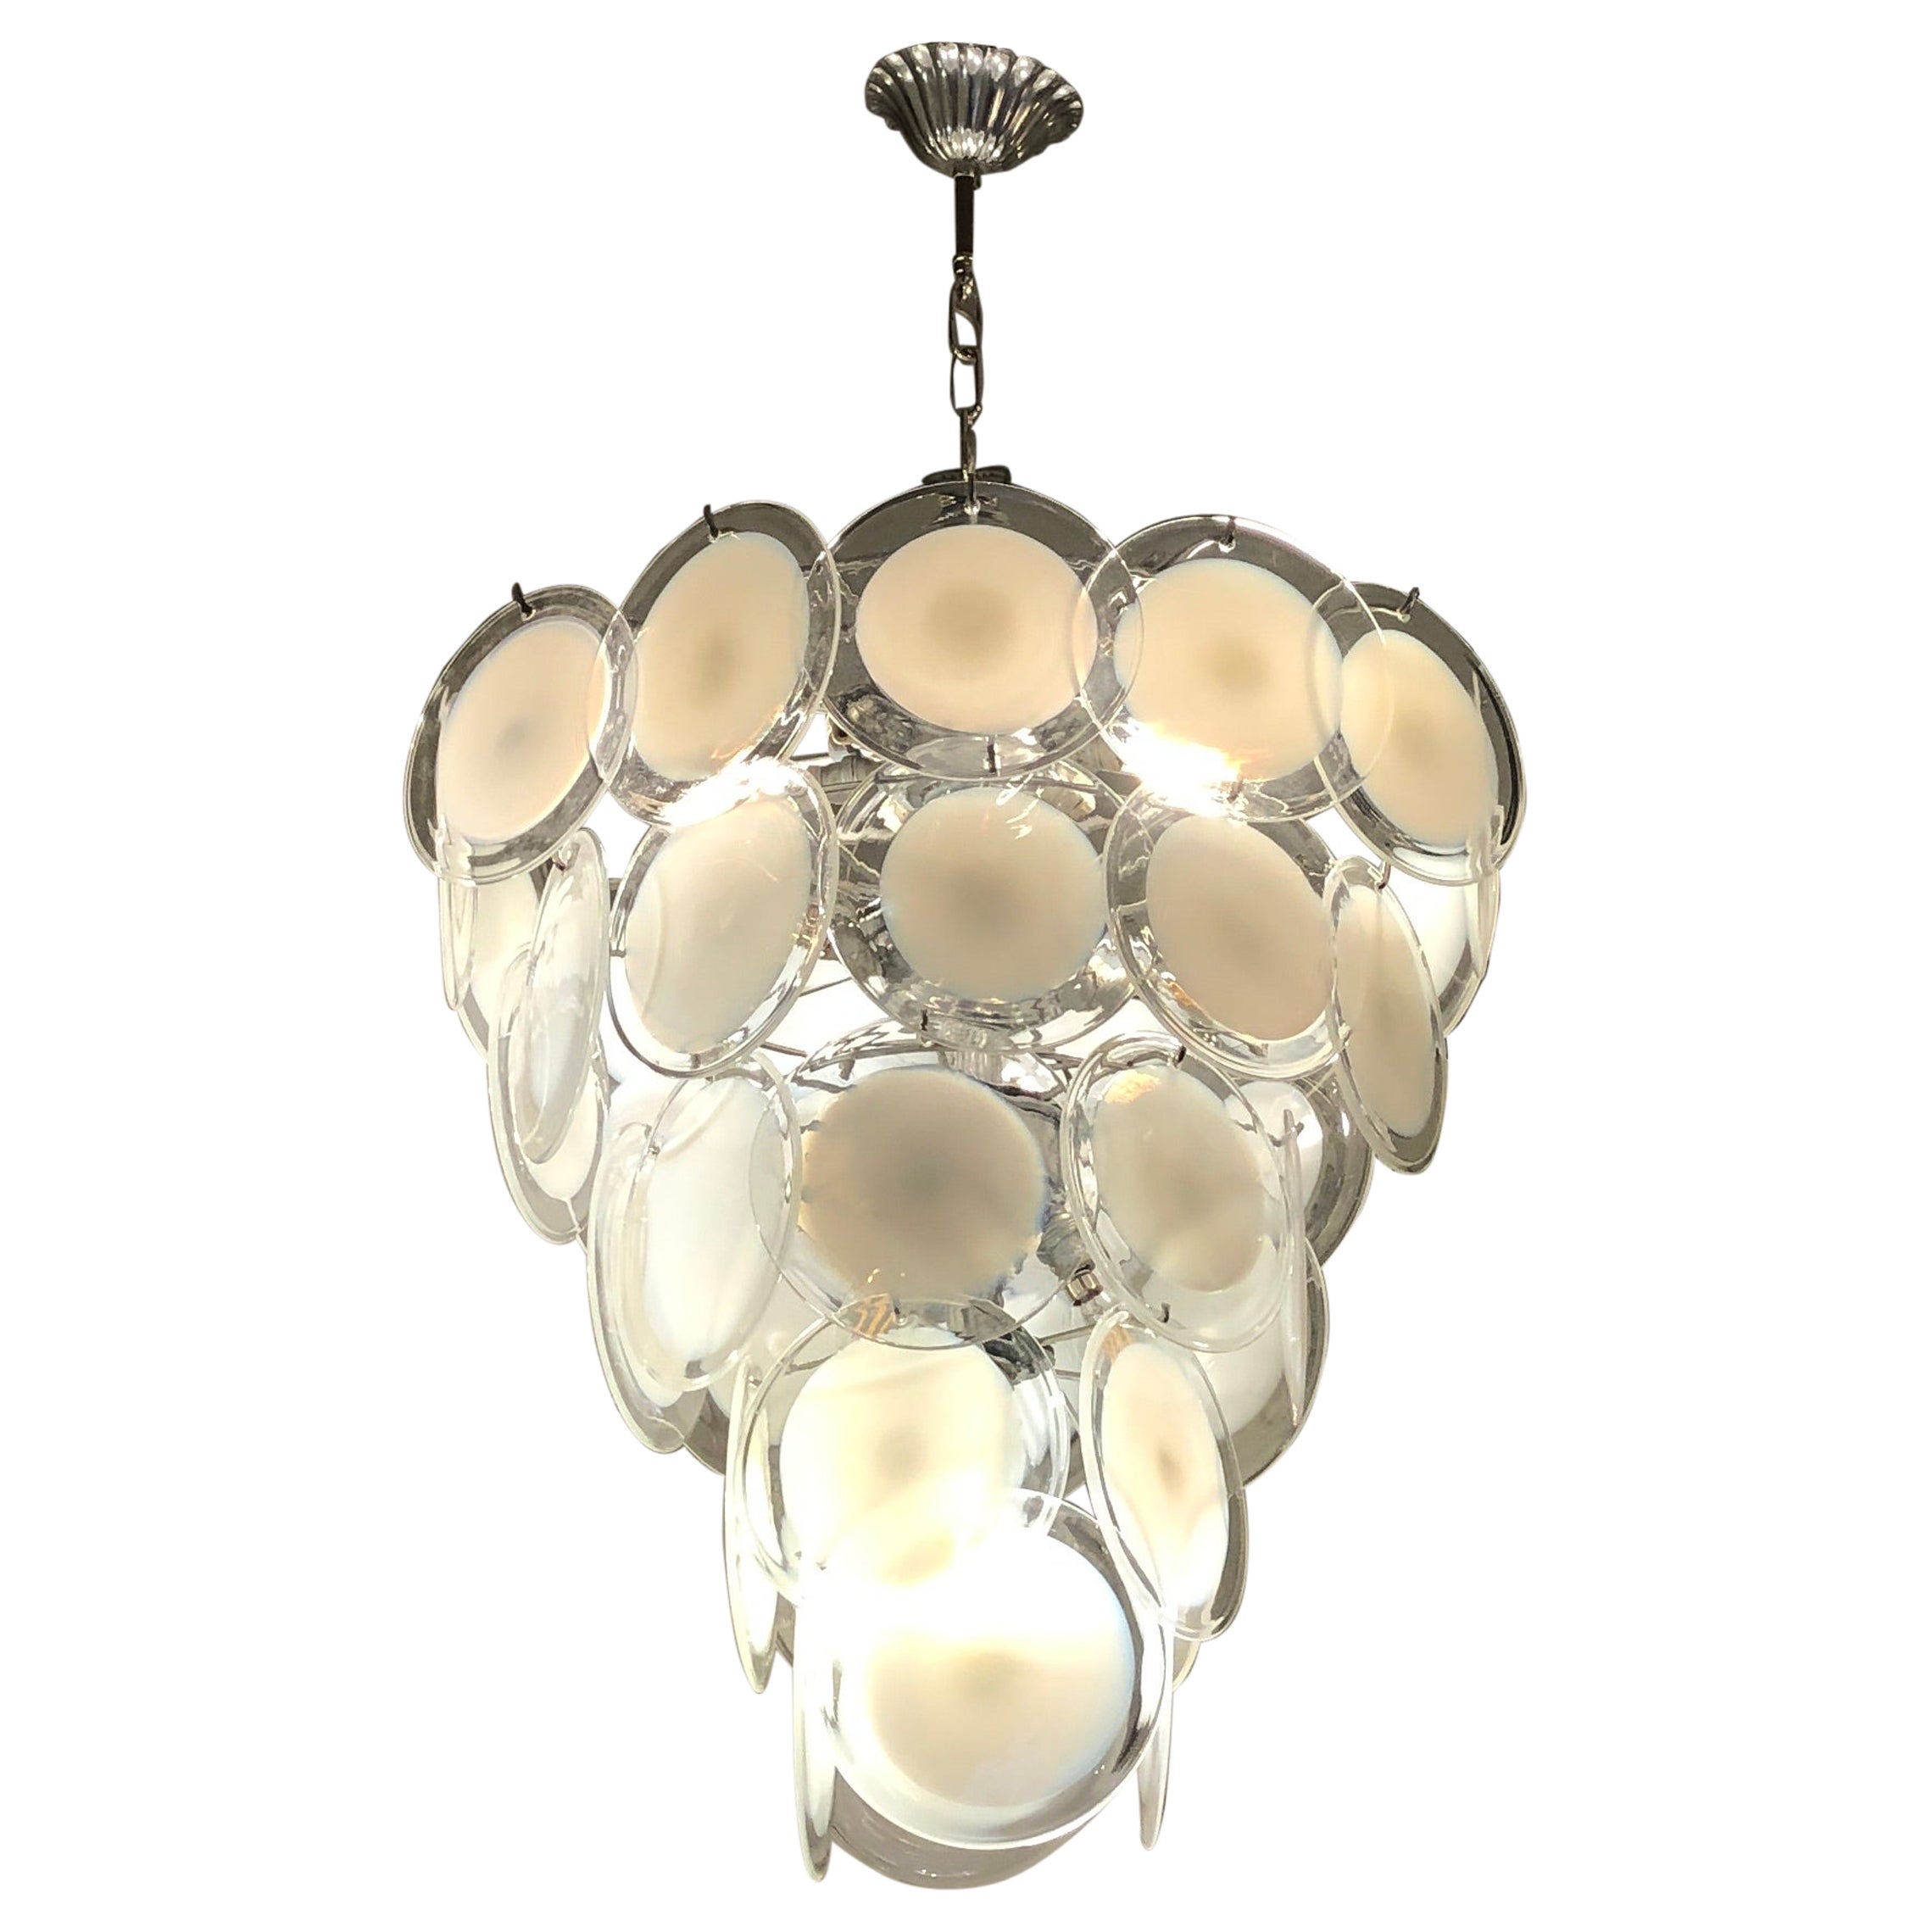 Vistosi for Venini Rounded Transparent and White Blown Glass Disks Chandeliers